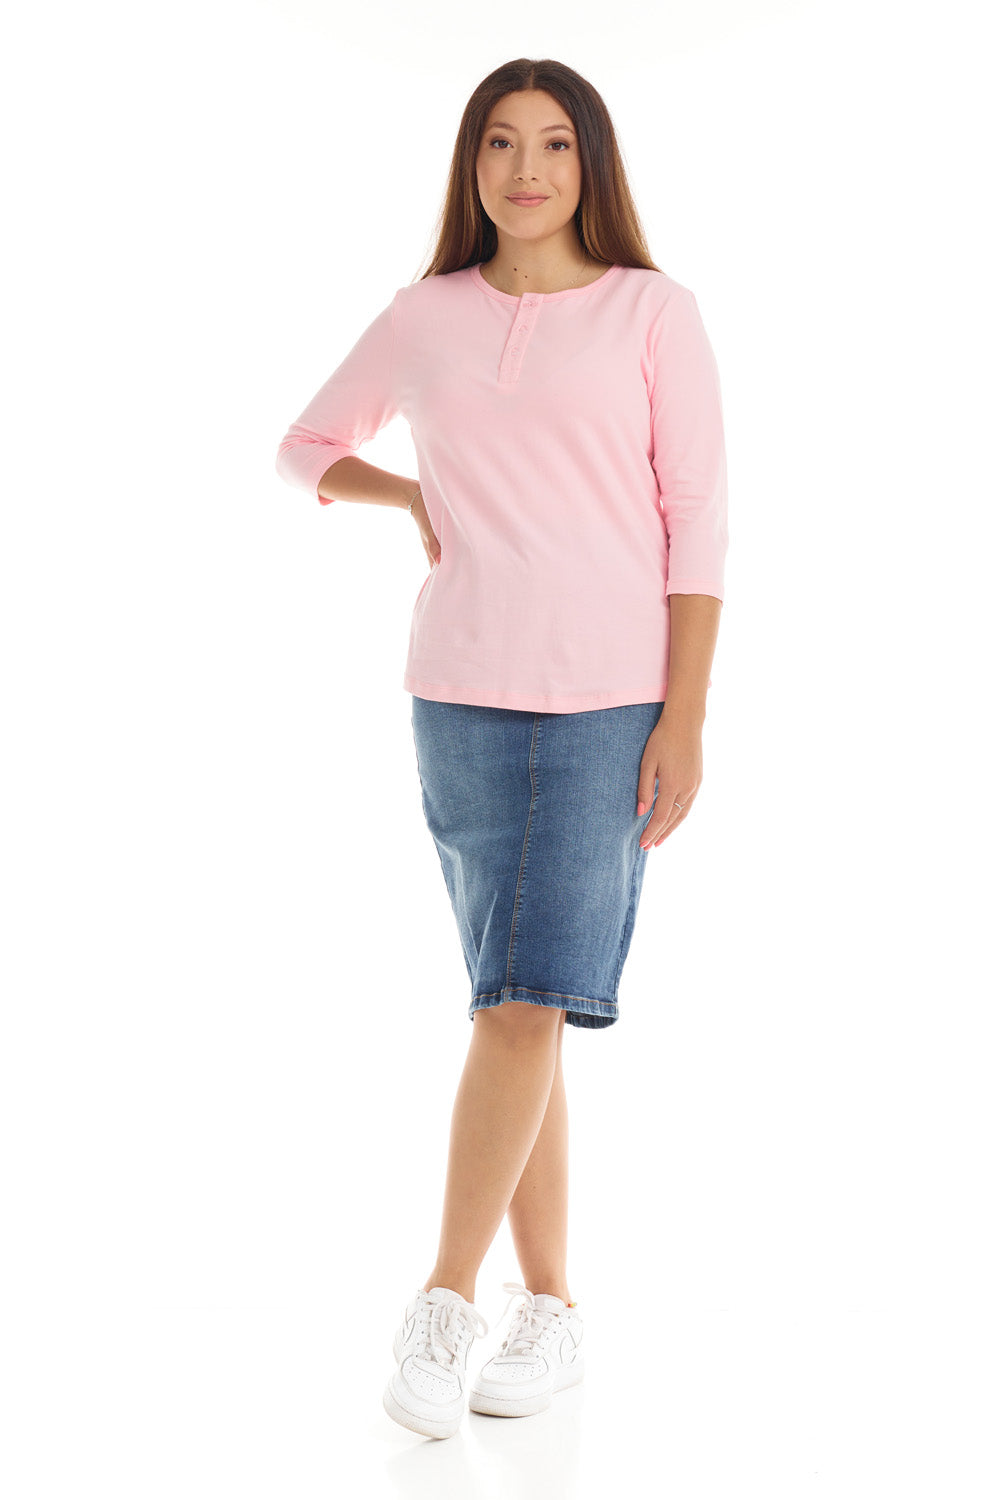 pink henley top with 3 buttons for women